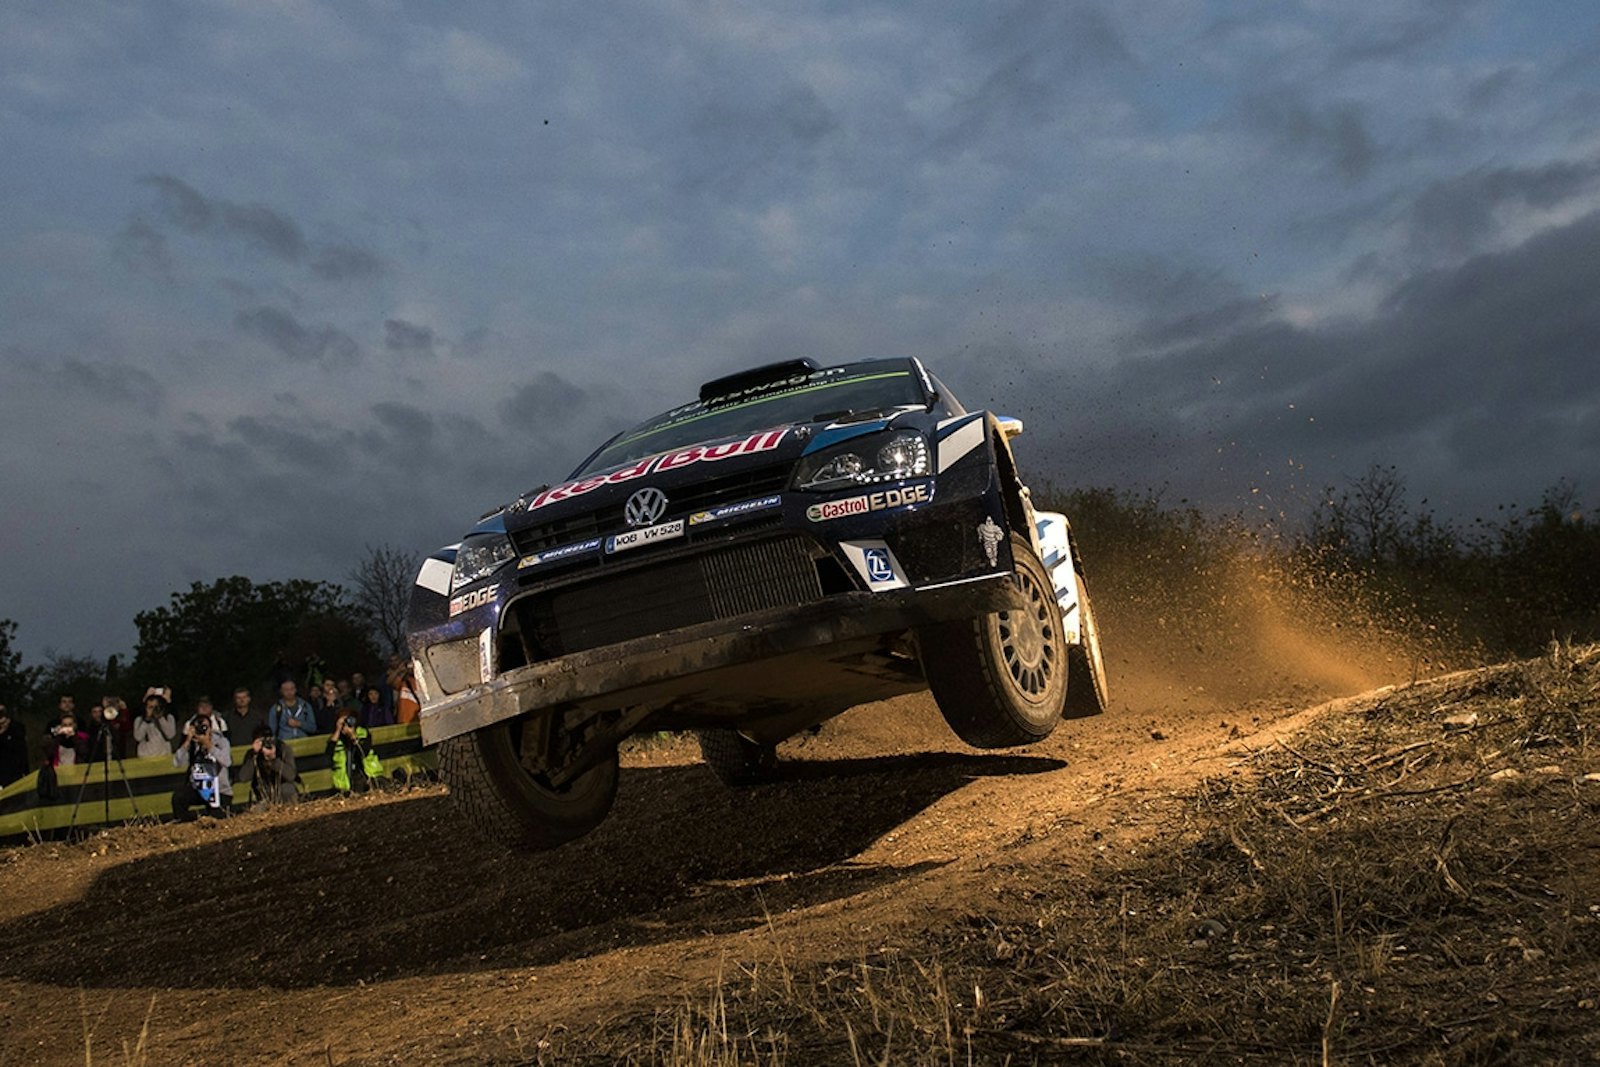 Sebastien Ogier (FRA) performs during FIA World Rally Championship 2016 Spain in Salou , Spain  on 13 October 2016 // Jaanus Ree/Red Bull Content Pool // P-20161013-00512 // Usage for editorial use only // Please go to www.redbullcontentpool.com for further information. //